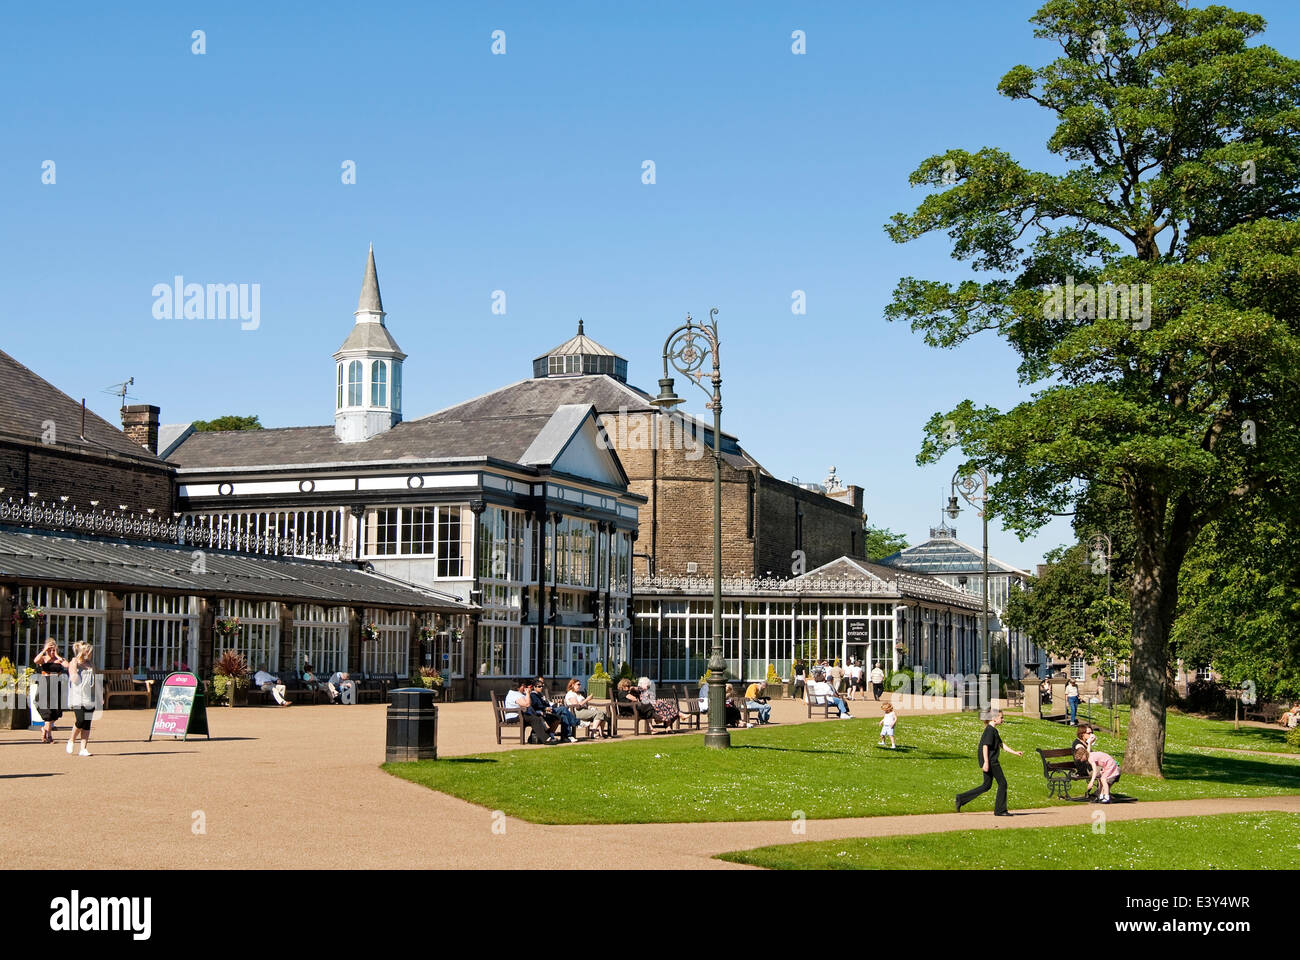 Pavilion Gardens in Buxton, a historic venue situated in the heart of Buxton. Stock Photo